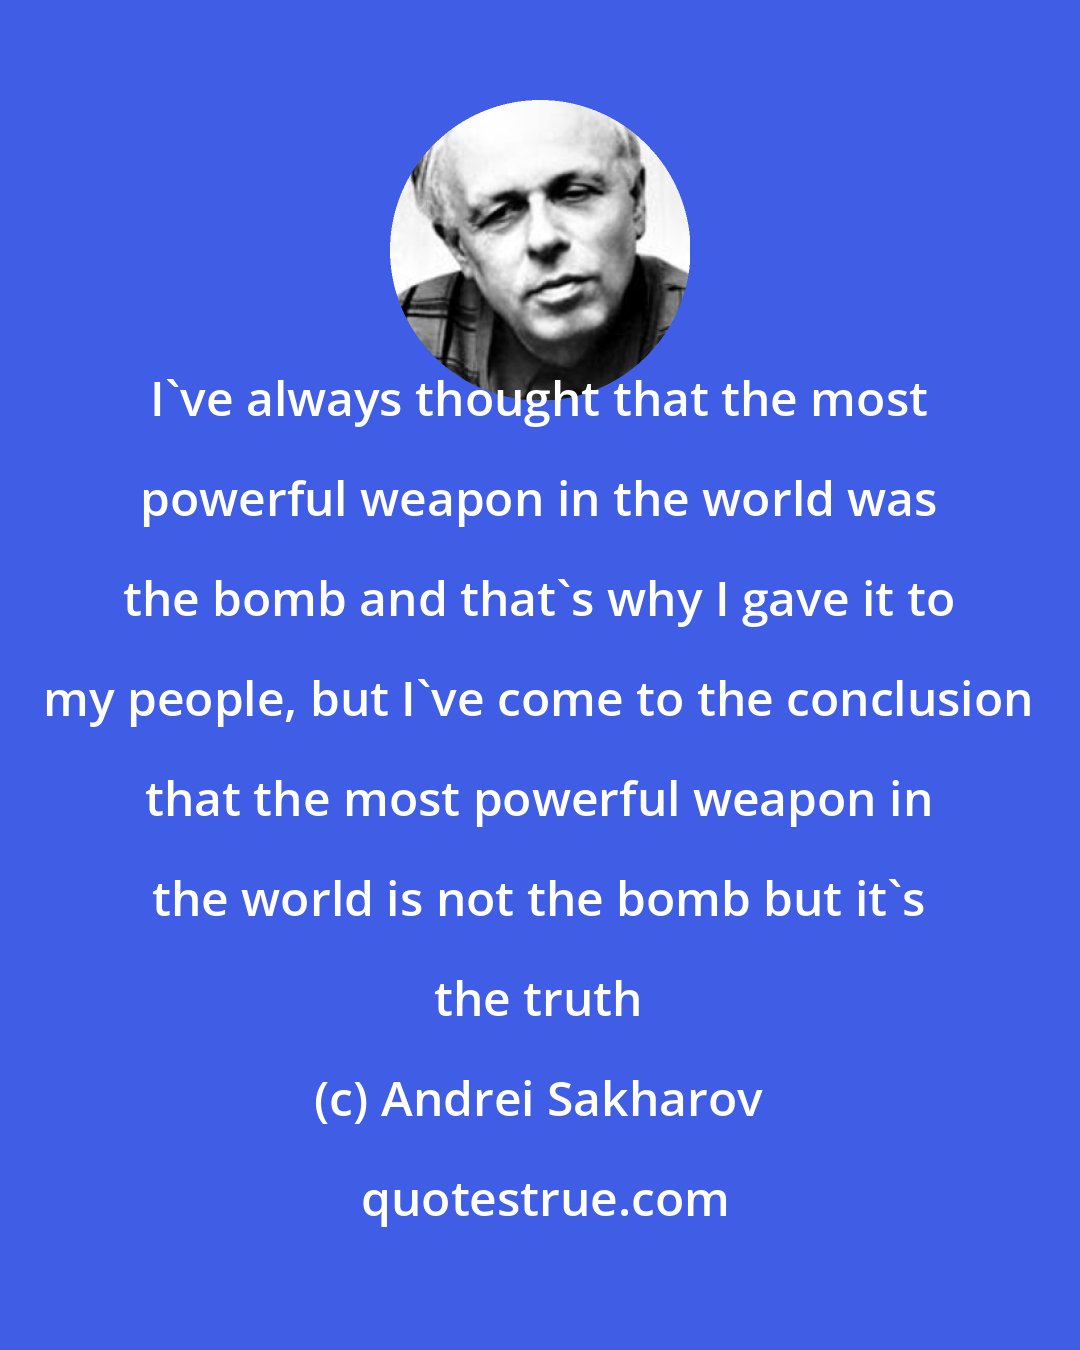 Andrei Sakharov: I've always thought that the most powerful weapon in the world was the bomb and that's why I gave it to my people, but I've come to the conclusion that the most powerful weapon in the world is not the bomb but it's the truth